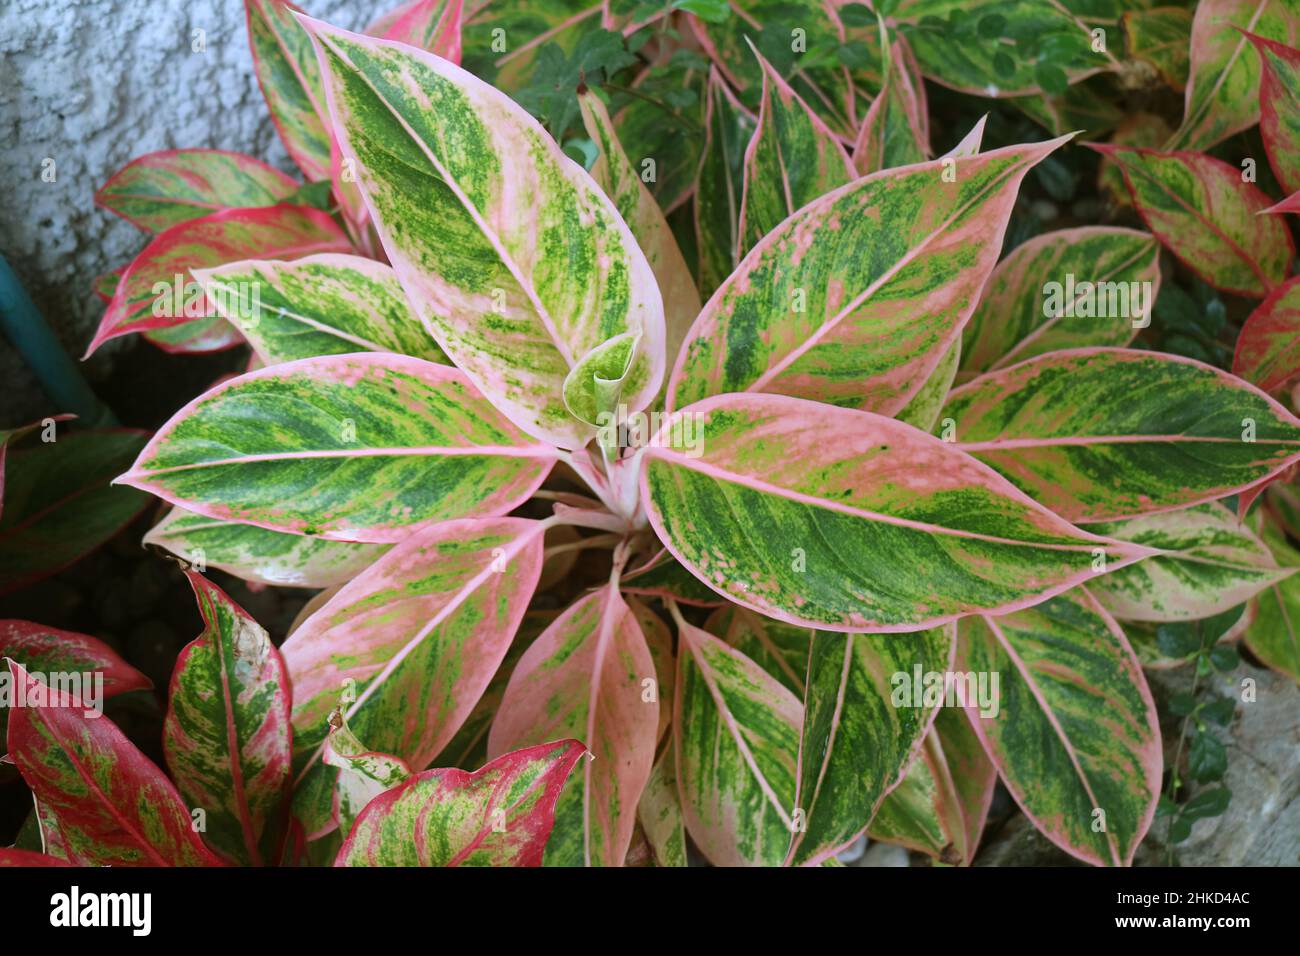 Amazing Green and Pink Foliage of Aglaonema Siam Aurora Plant in the Garden Stock Photo